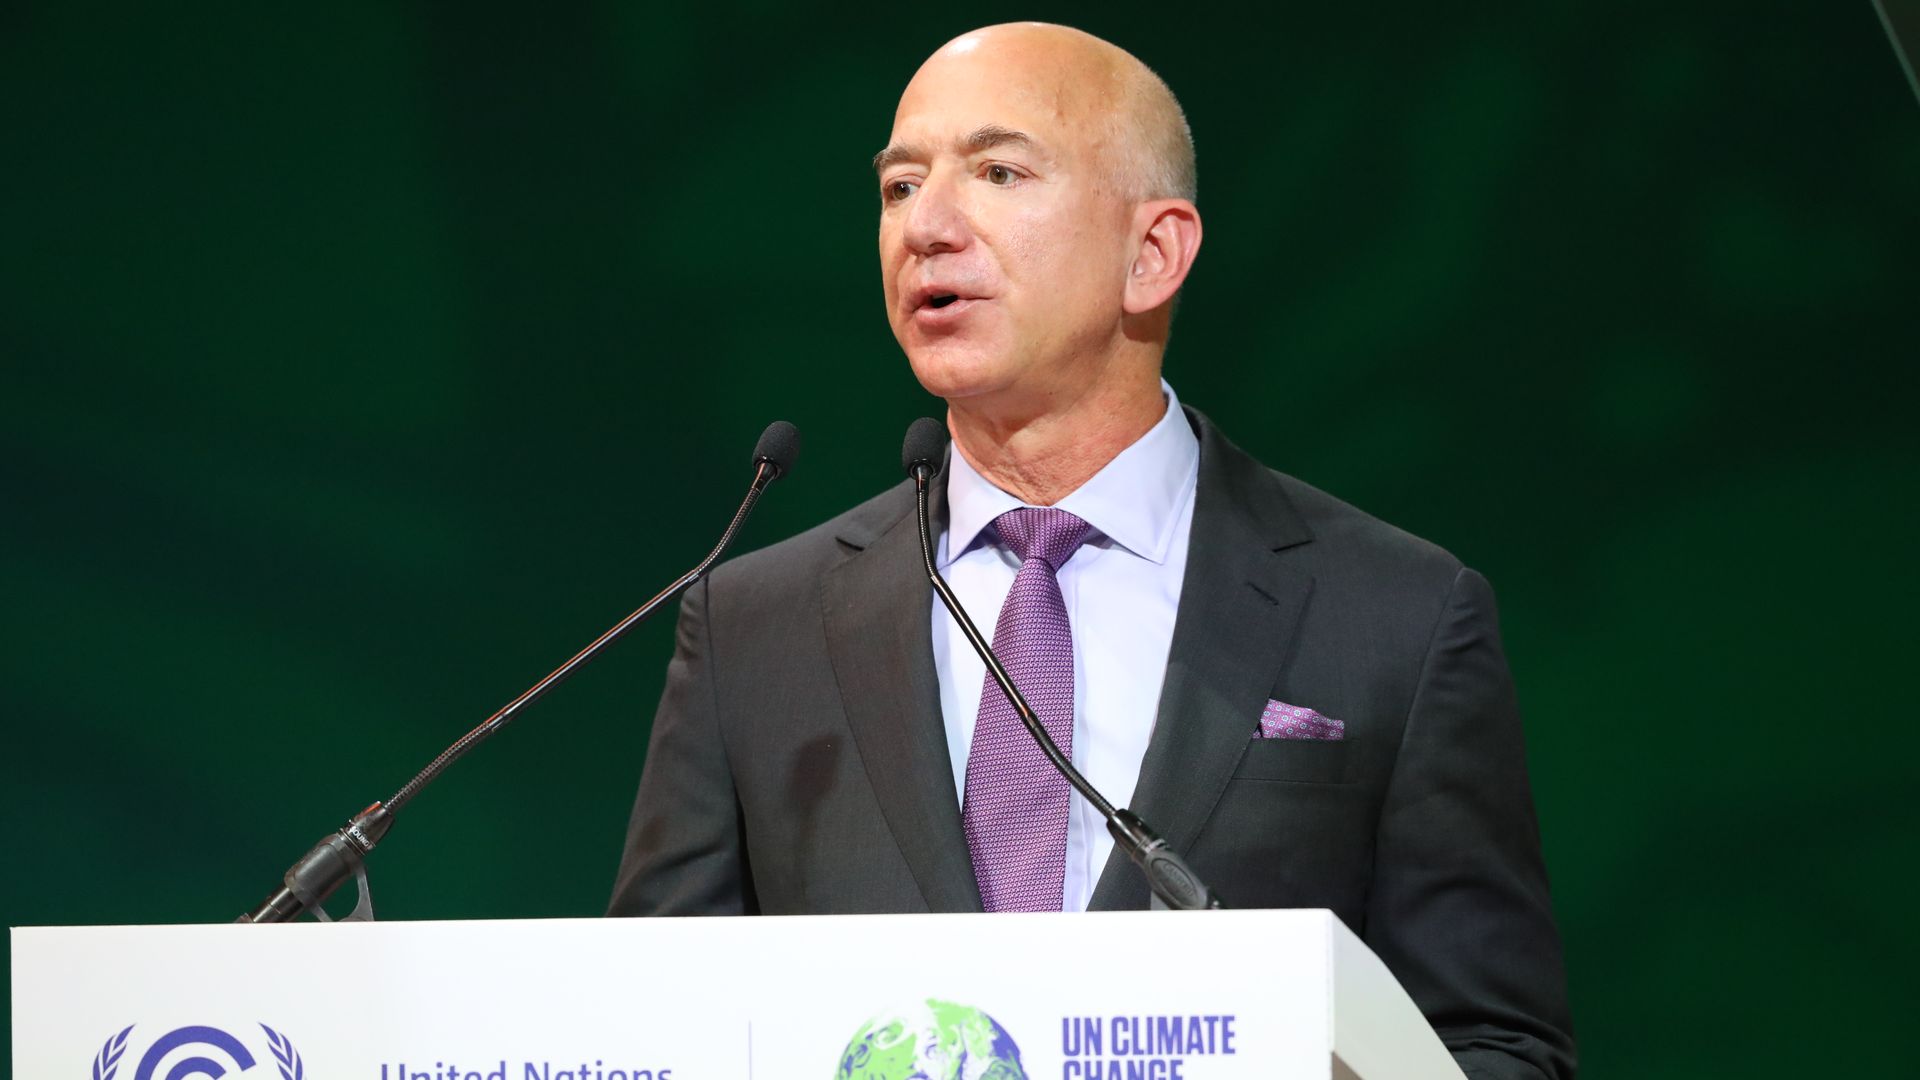  Jeff Bezos speaks during an Action on Forests and Land Use event on day three of COP26 on November 02, 2021 in Glasgow, United Kingdom. 